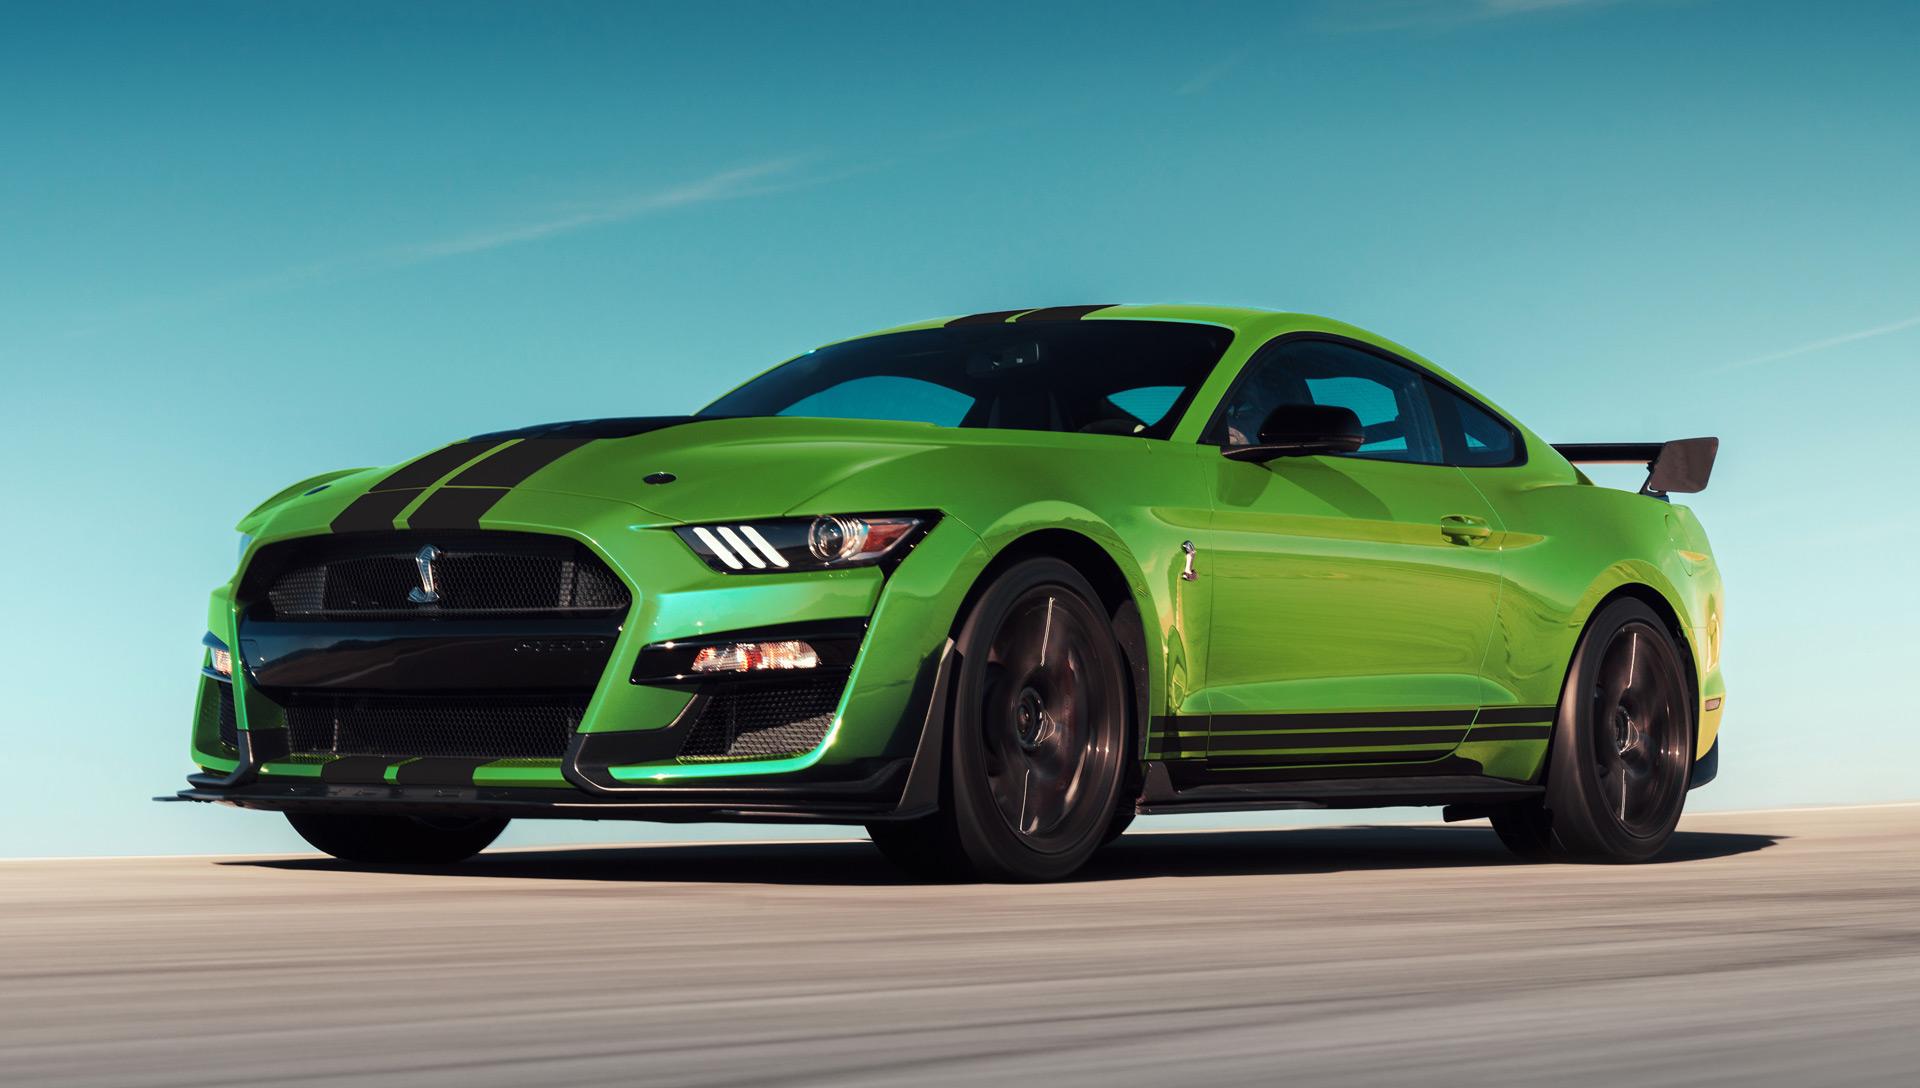 Ford Mustang Shelby GT500 Green Supercar Front View wallpapers